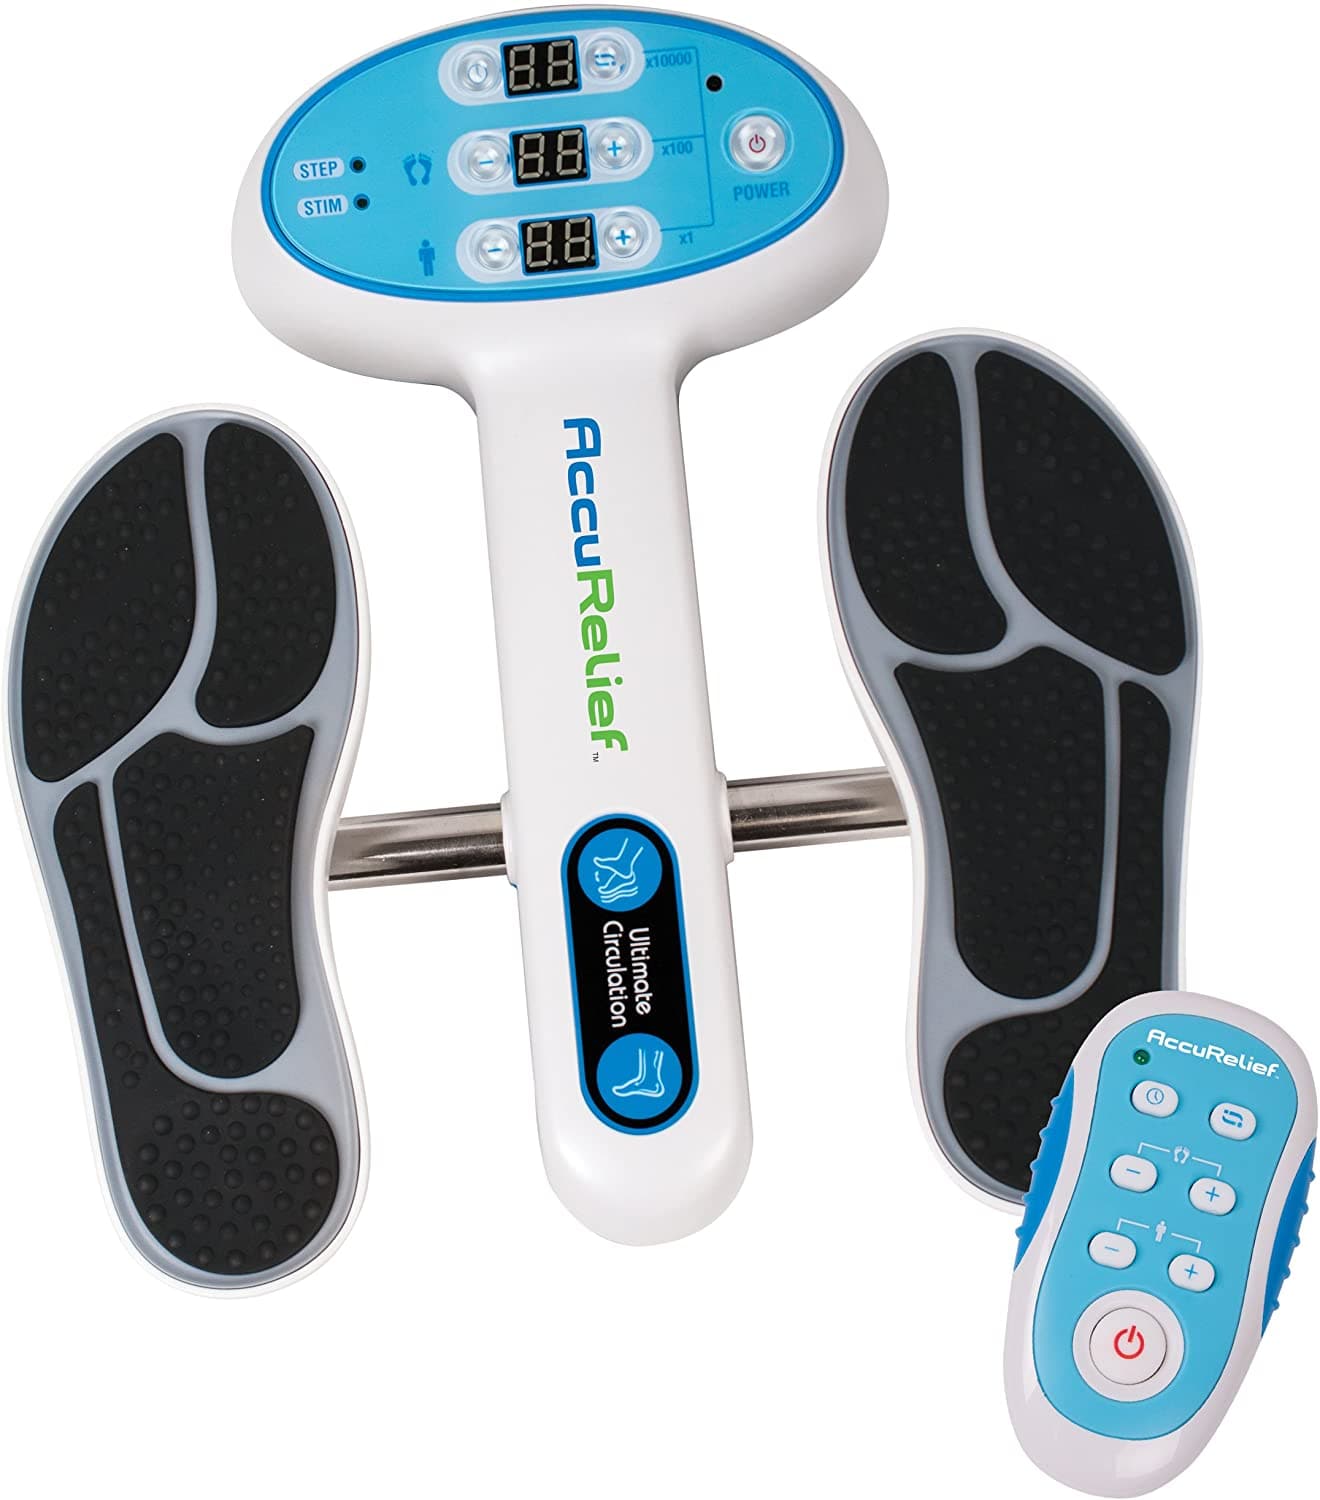 AccuRelief Ultimate Foot Circulator with Remote - EMS Muscle Stimulator - Senior.com Pain Management